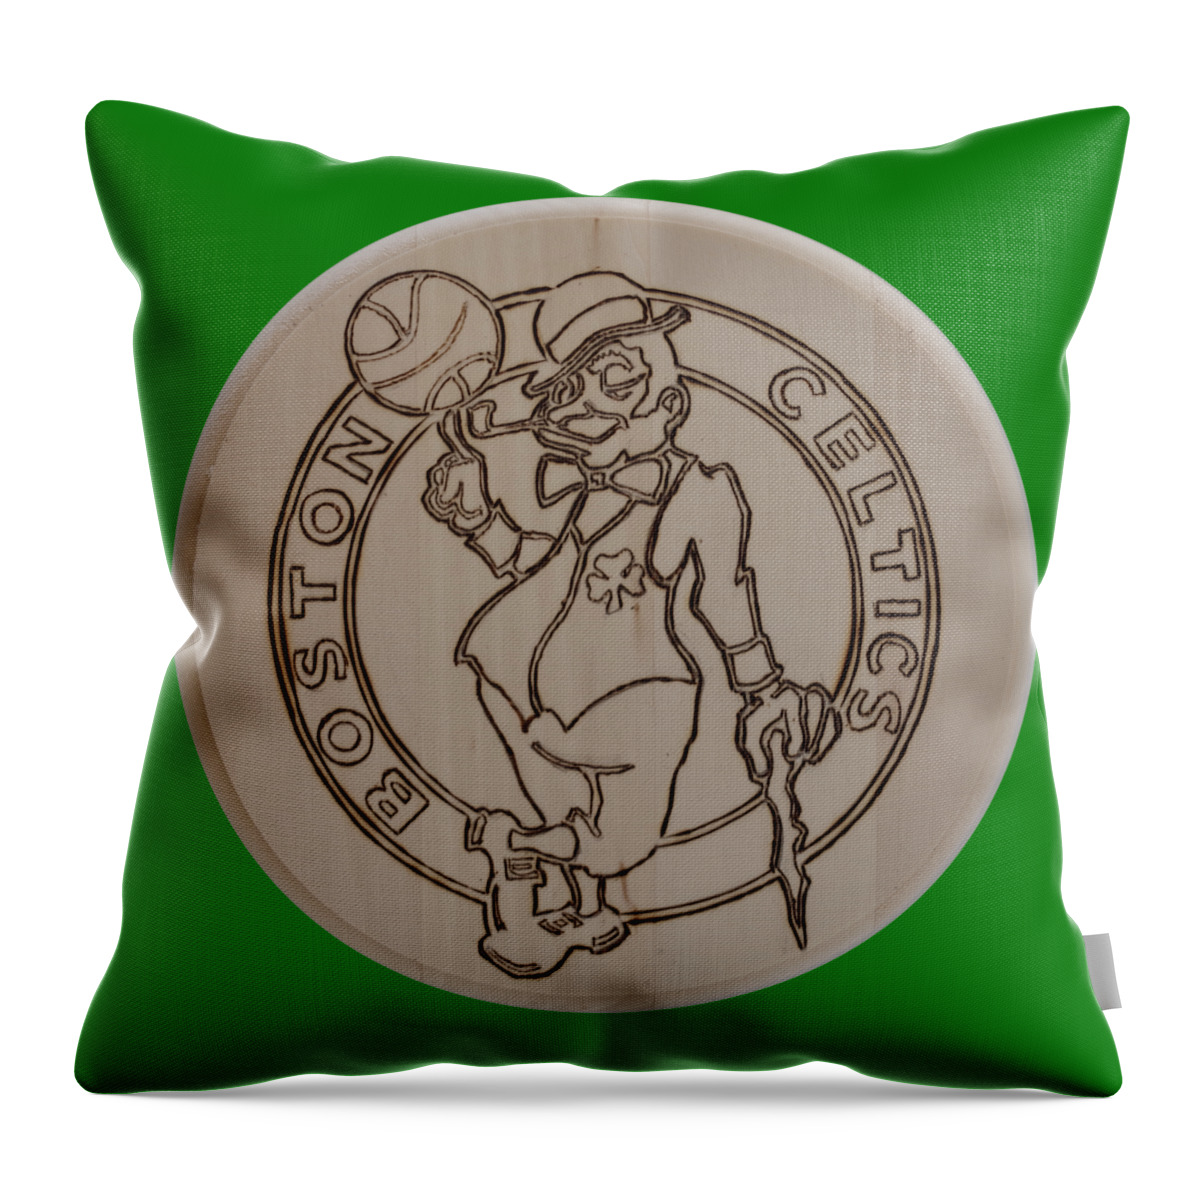 Wood Burned Art Throw Pillow featuring the pyrography Boston Celtics est 1946 by Sean Connolly